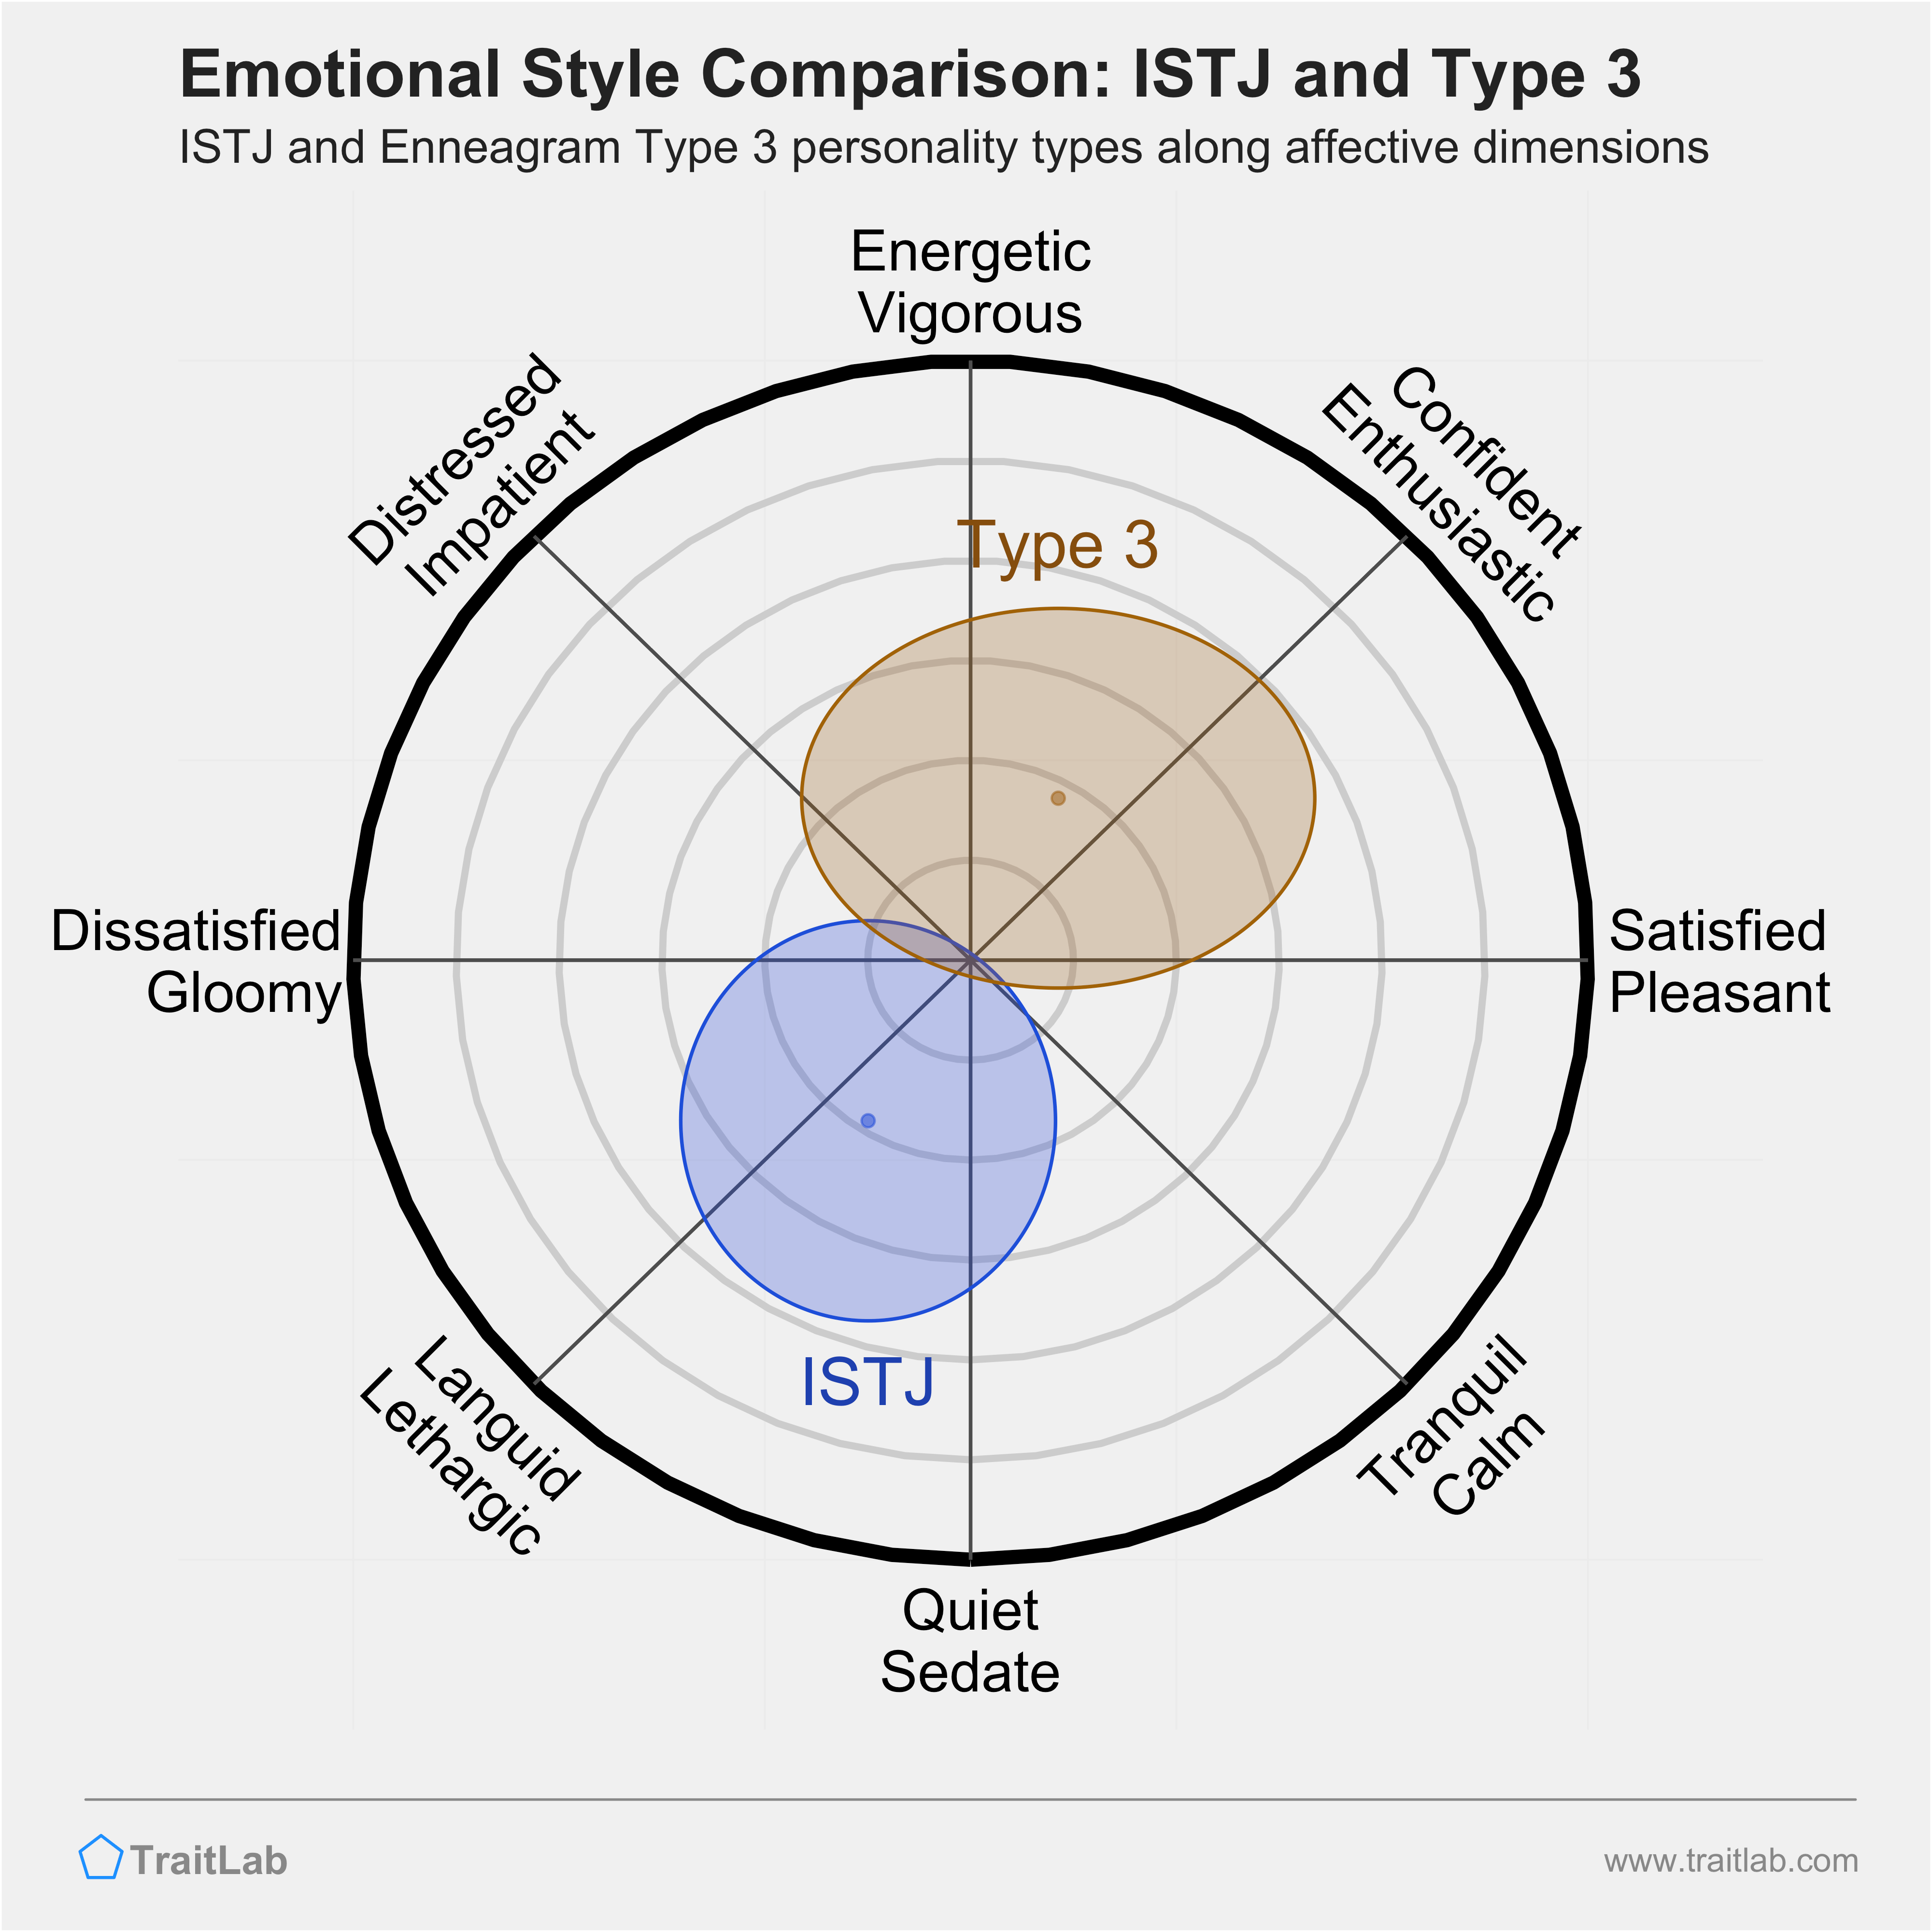 ISTJ and Type 3 comparison across emotional (affective) dimensions